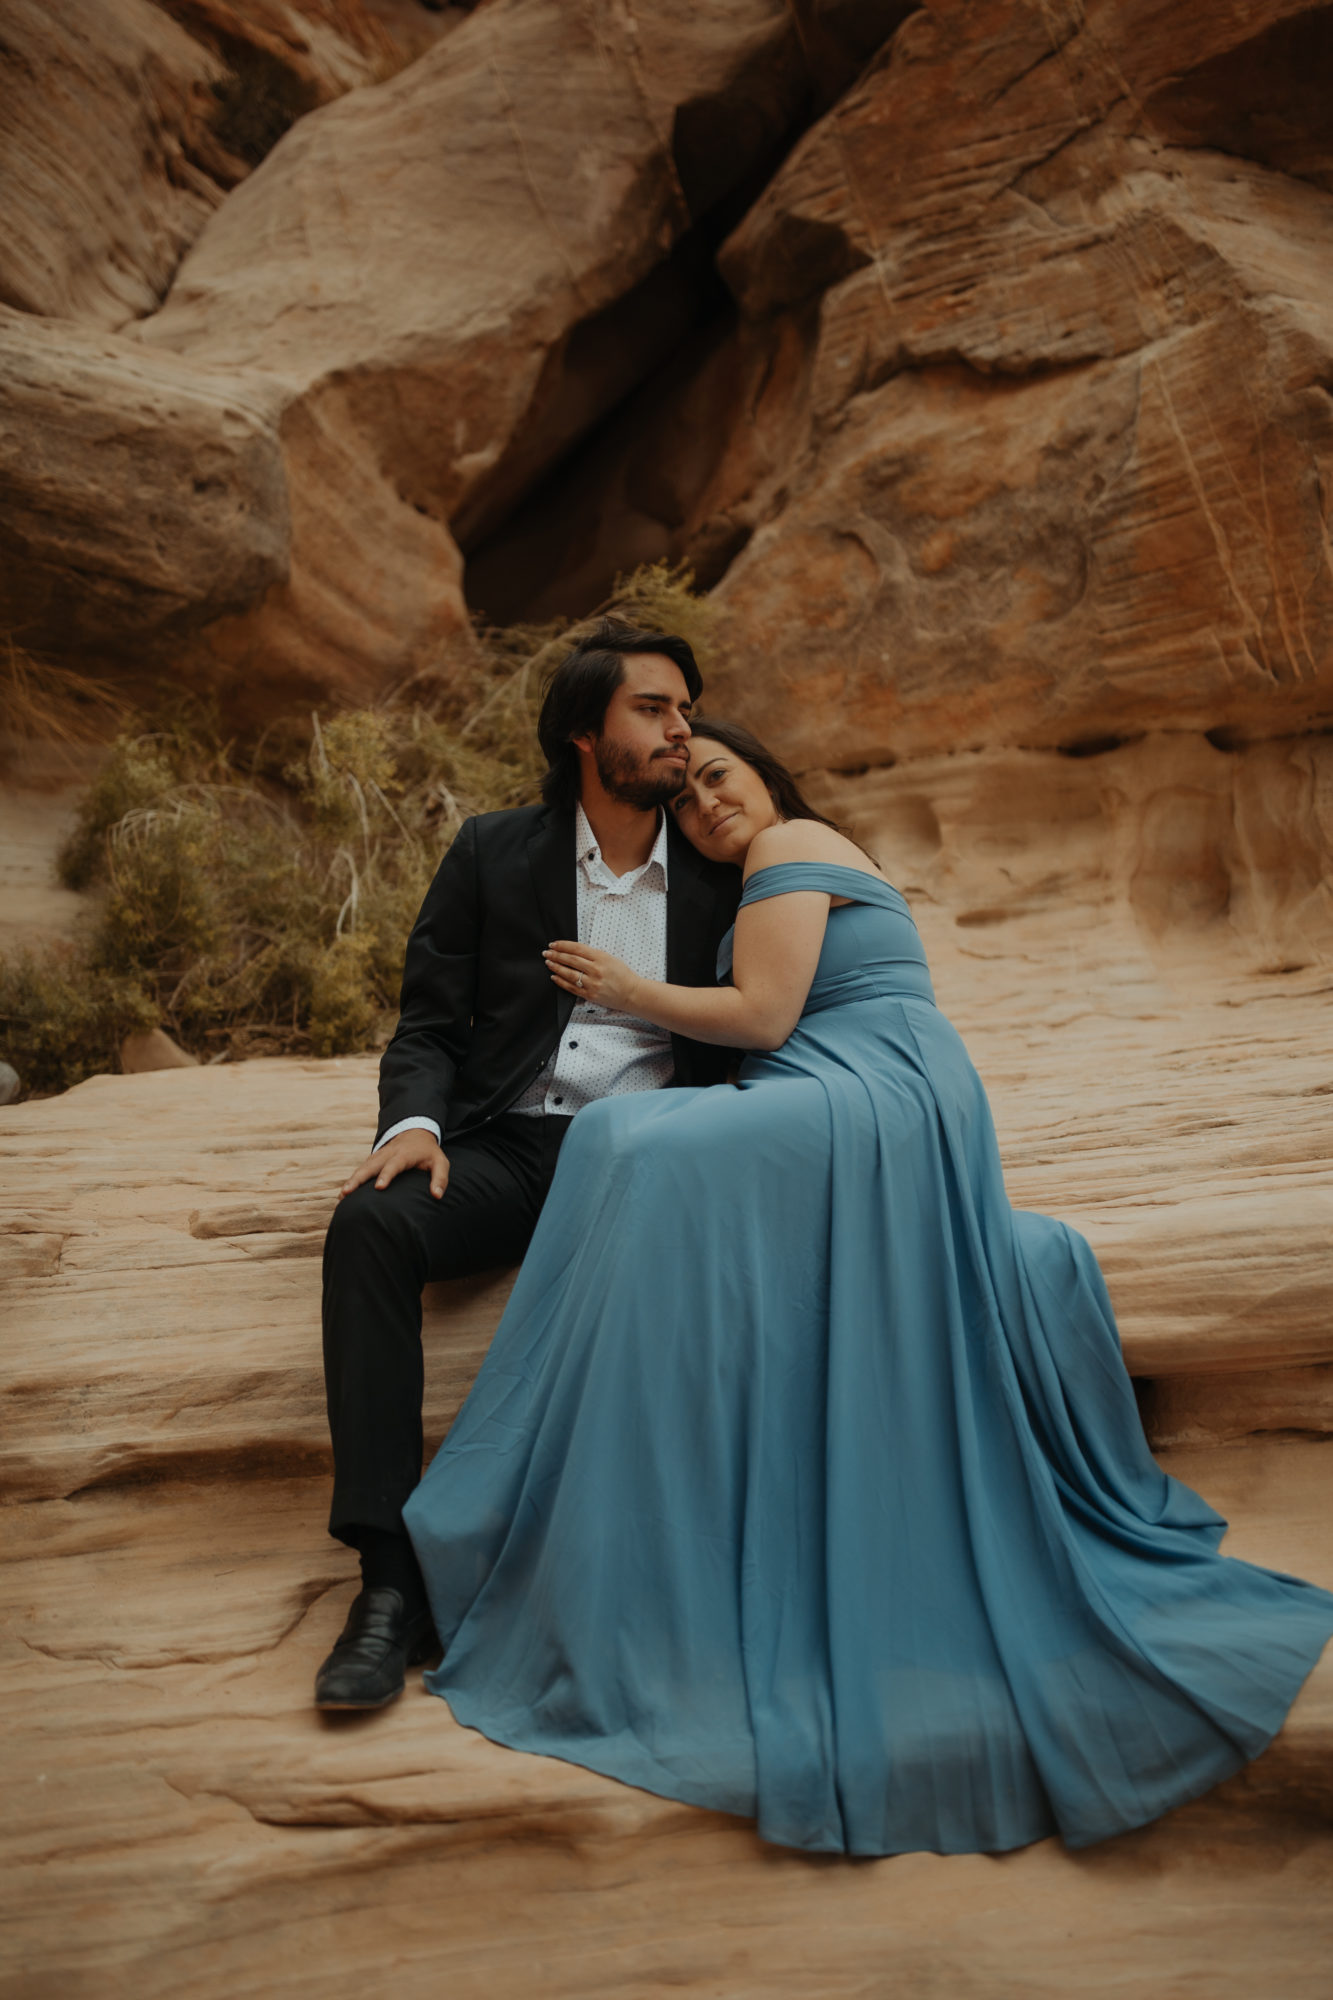 Couple in Formal Attire sitting on a tan large rock